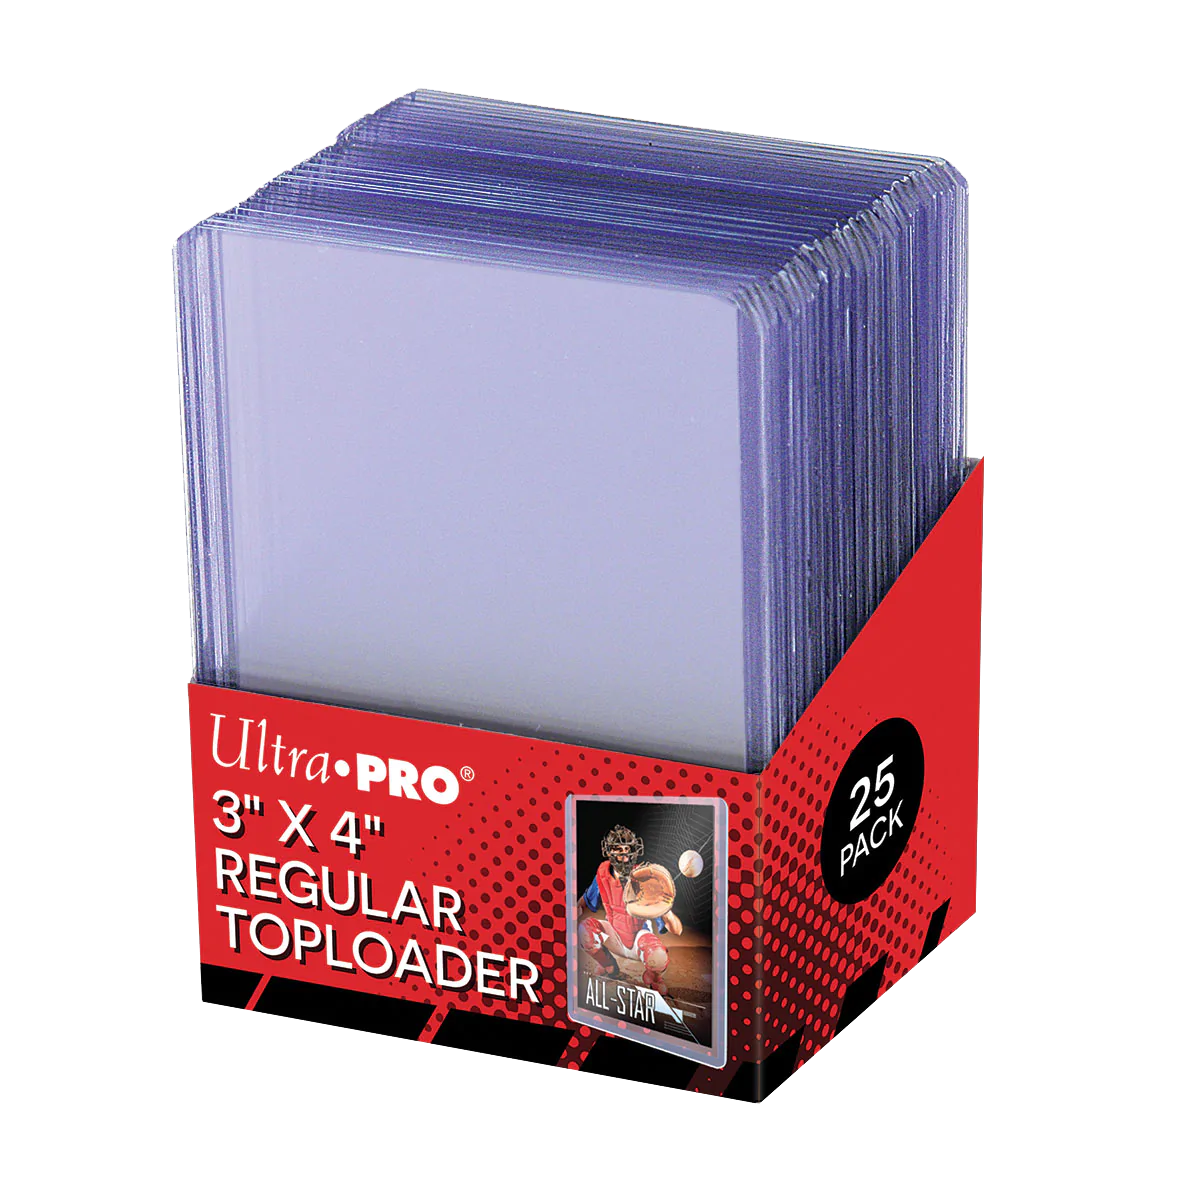 Ultra Pro - 3" x 4" Top Loaders (25ct)